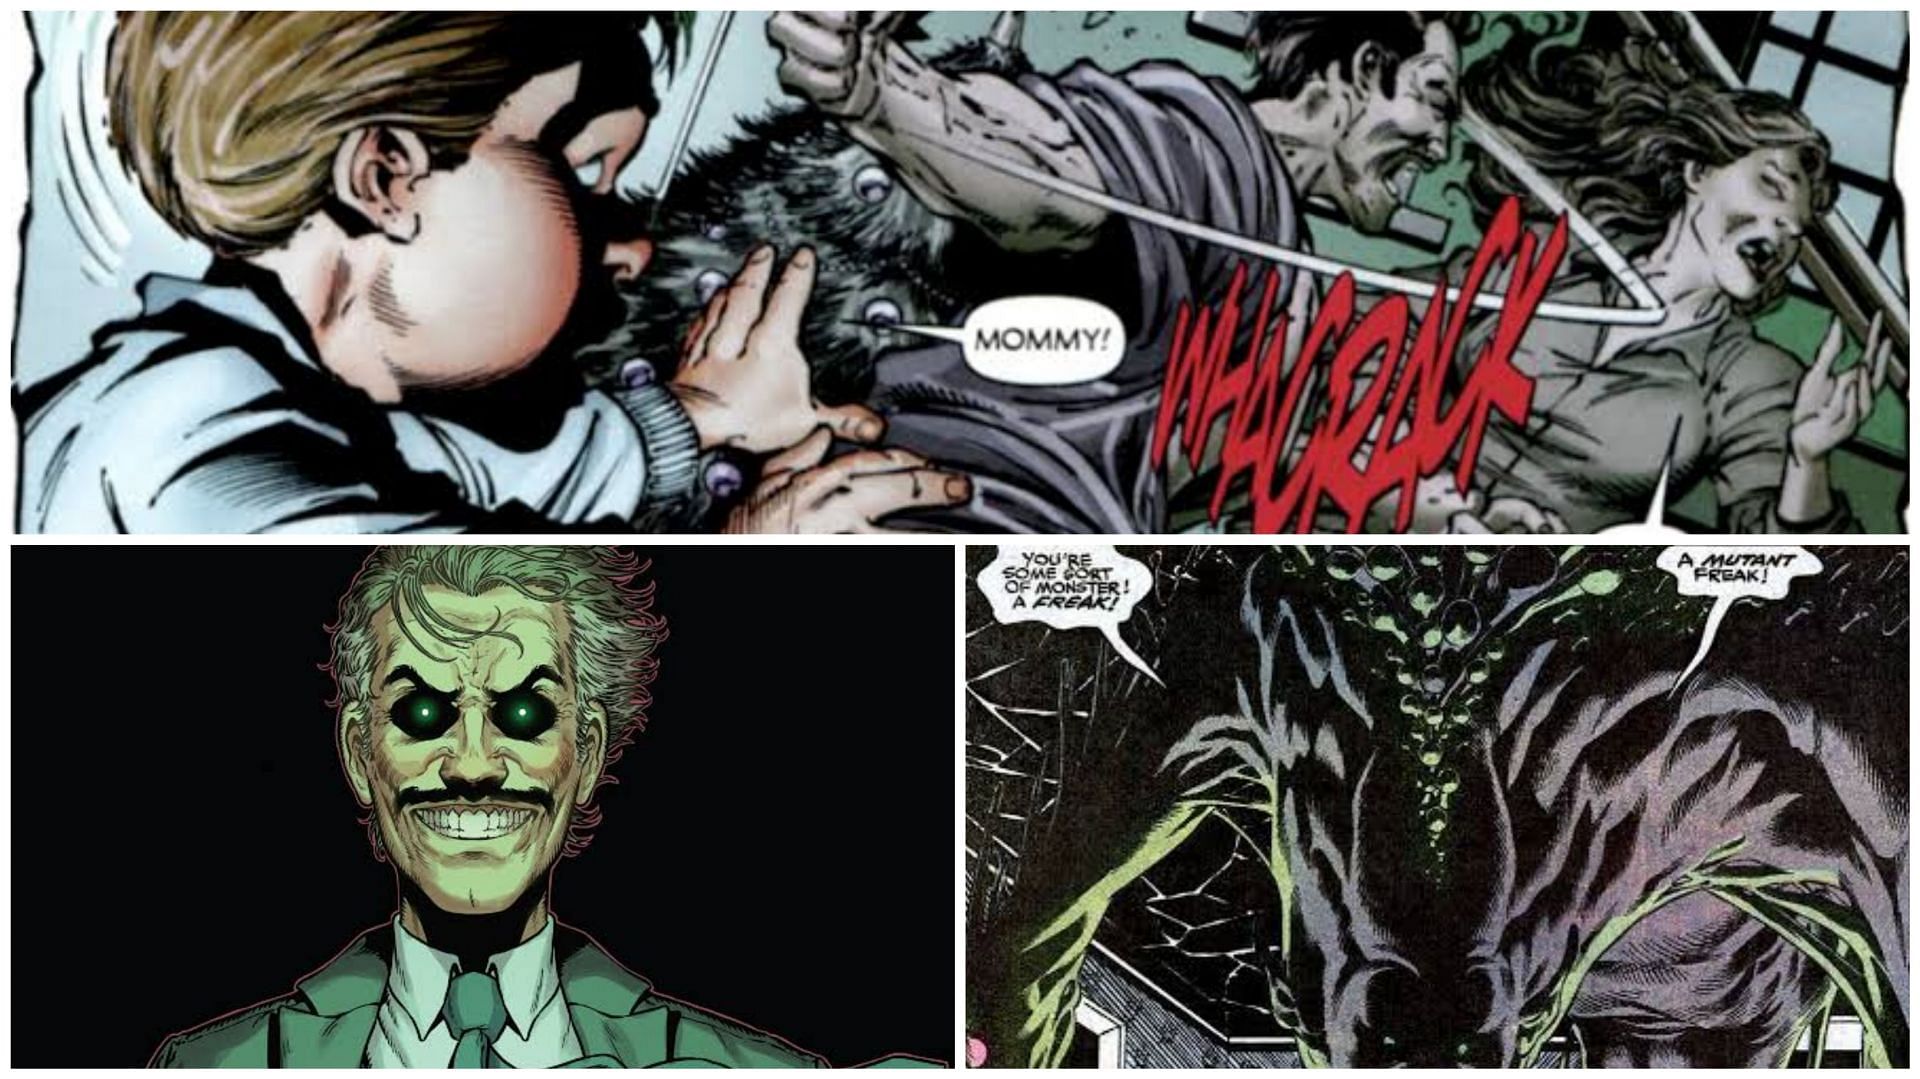 Snippets of Brian Banner from the Comics (Images via Marvel Comics)